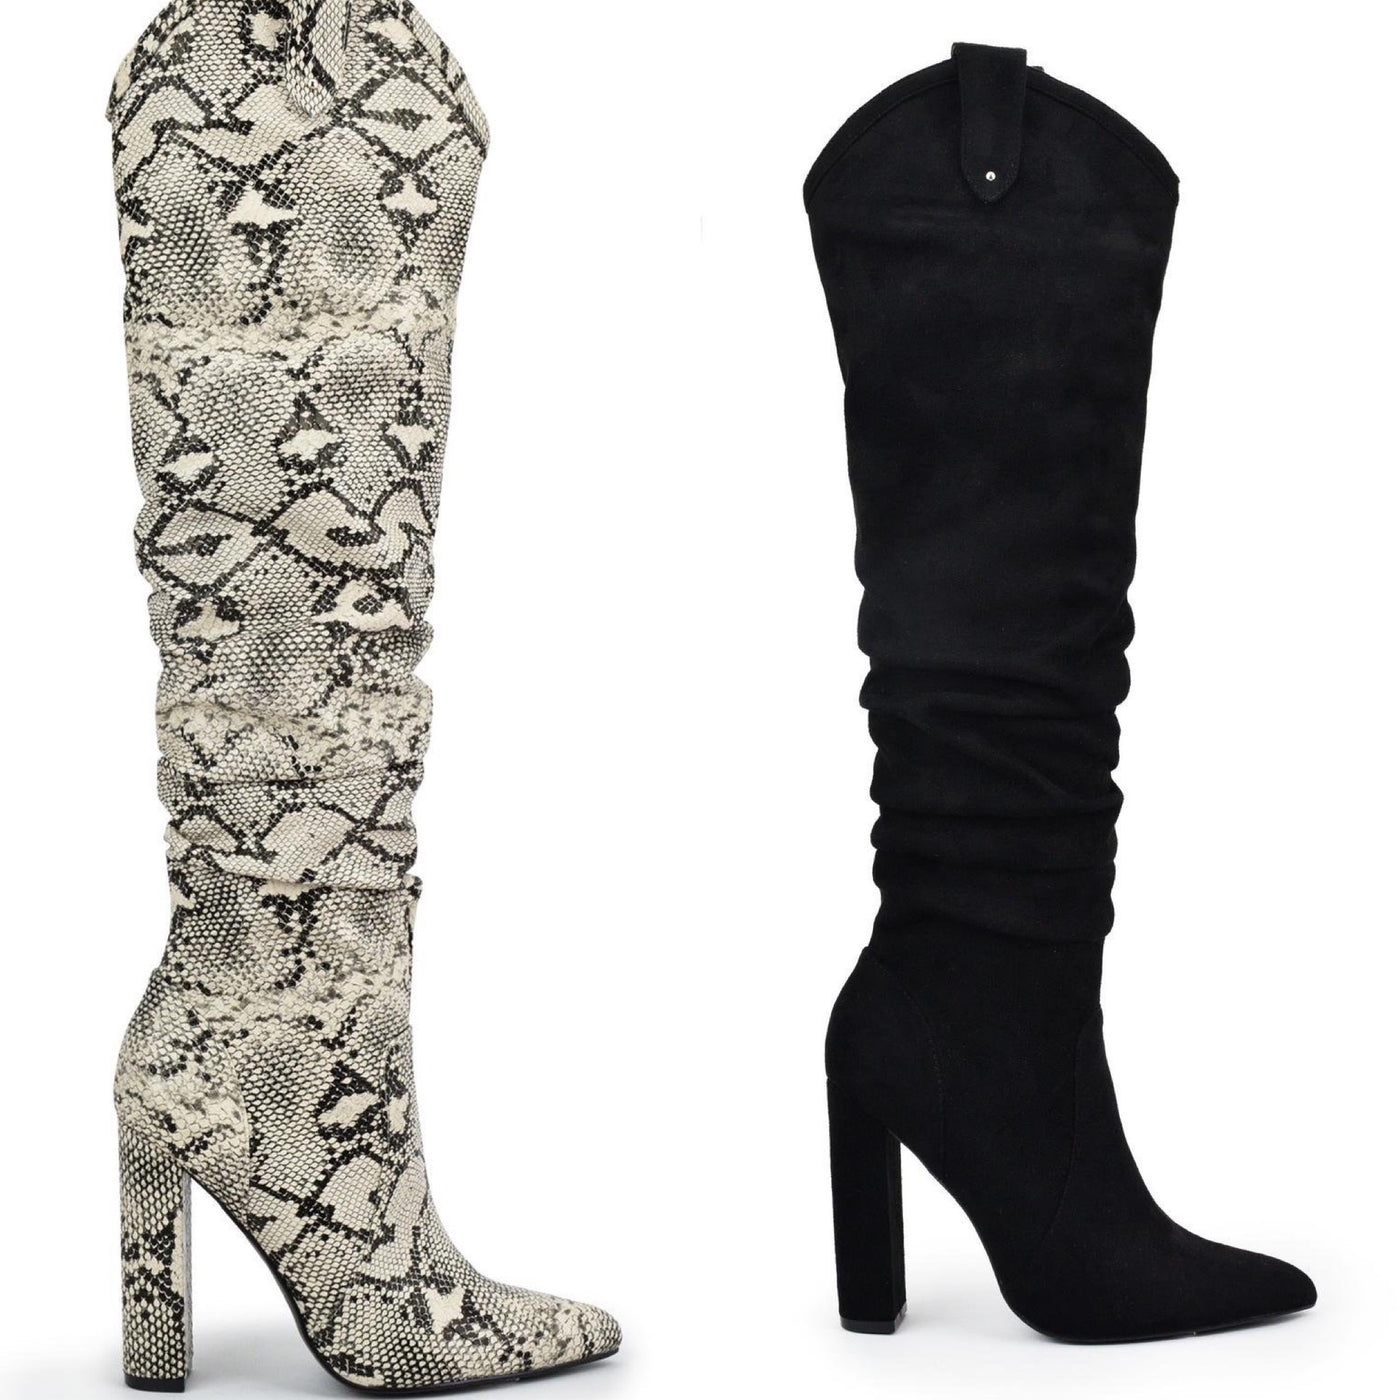 Slouchy knee high boot.